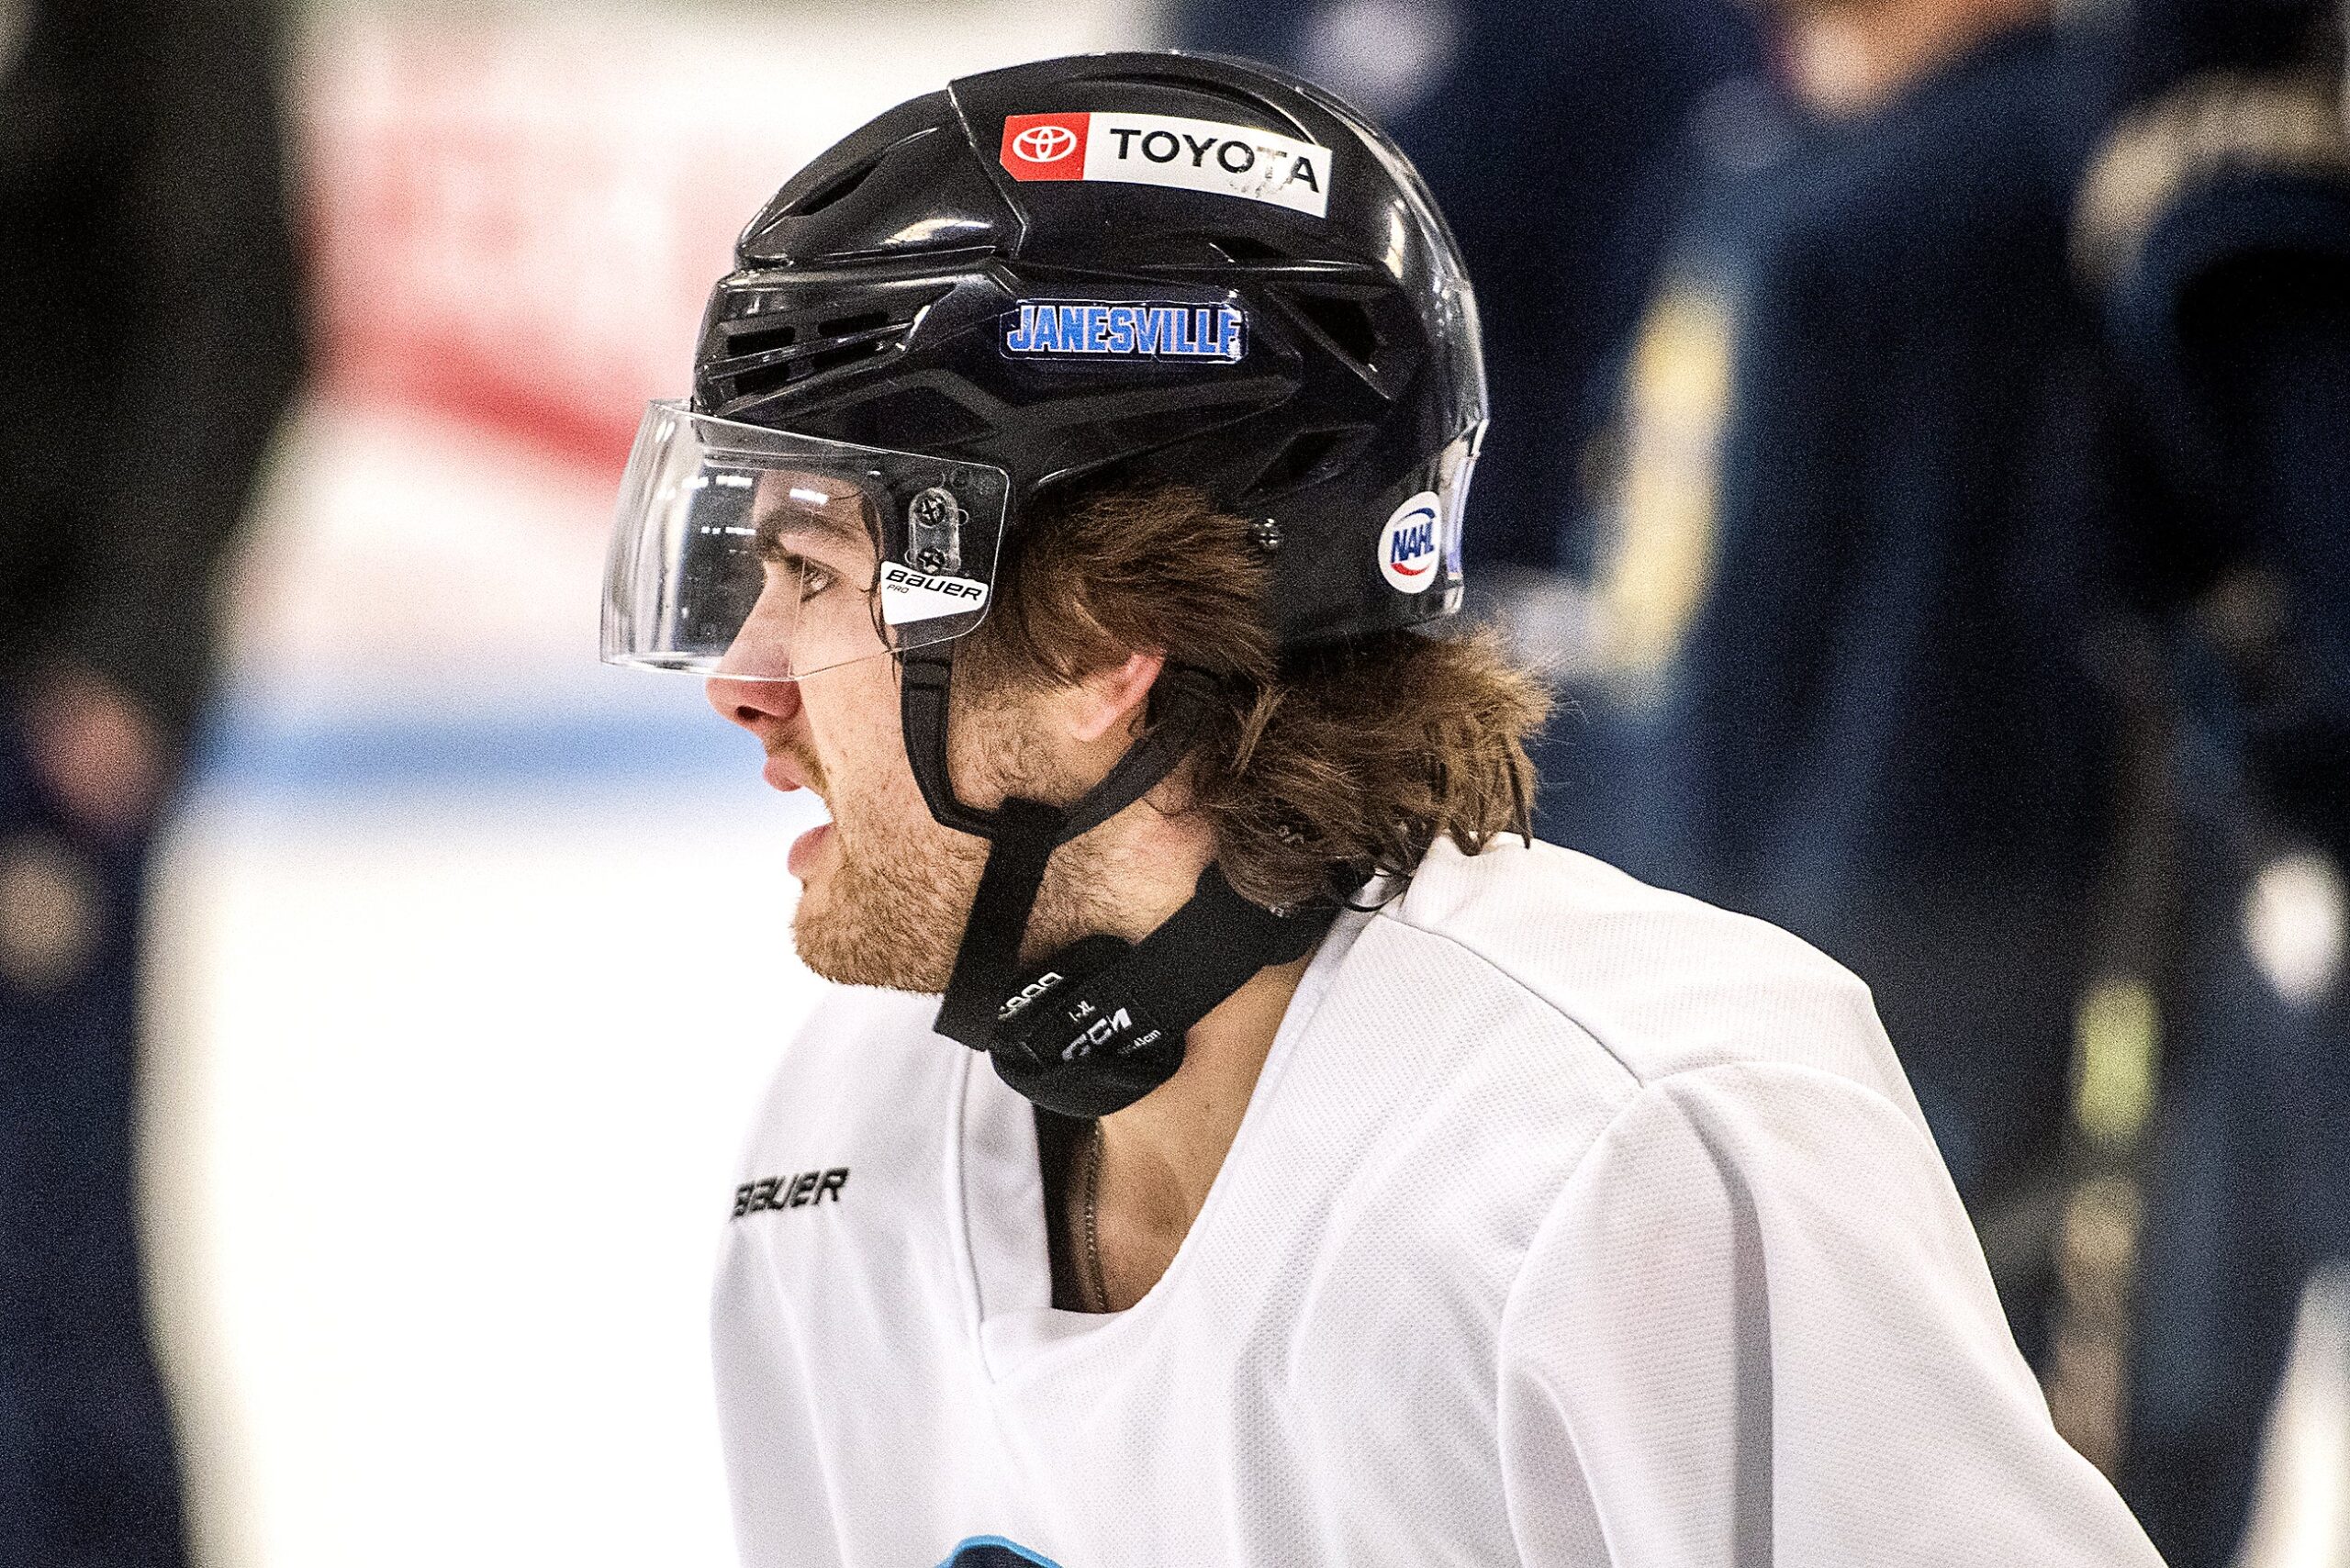 A player wears a helmet and a neck guard, which wraps around his neck and covers the front of it.